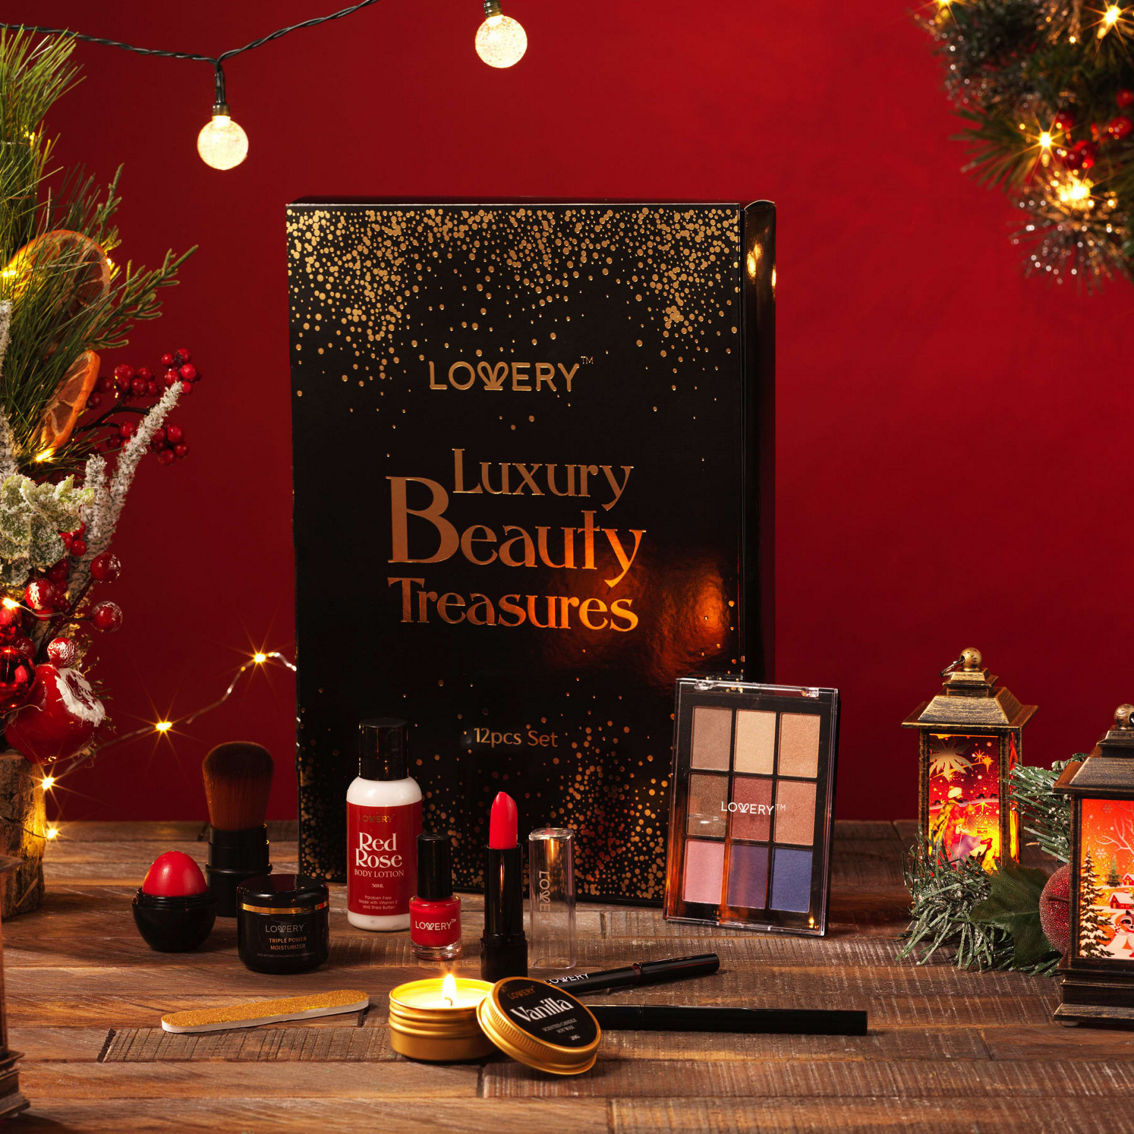 Lovery 12 Days Luxury Beauty Advent Calendar 22-Pc. Makeup & Skincare Gift Set - Image 5 of 5